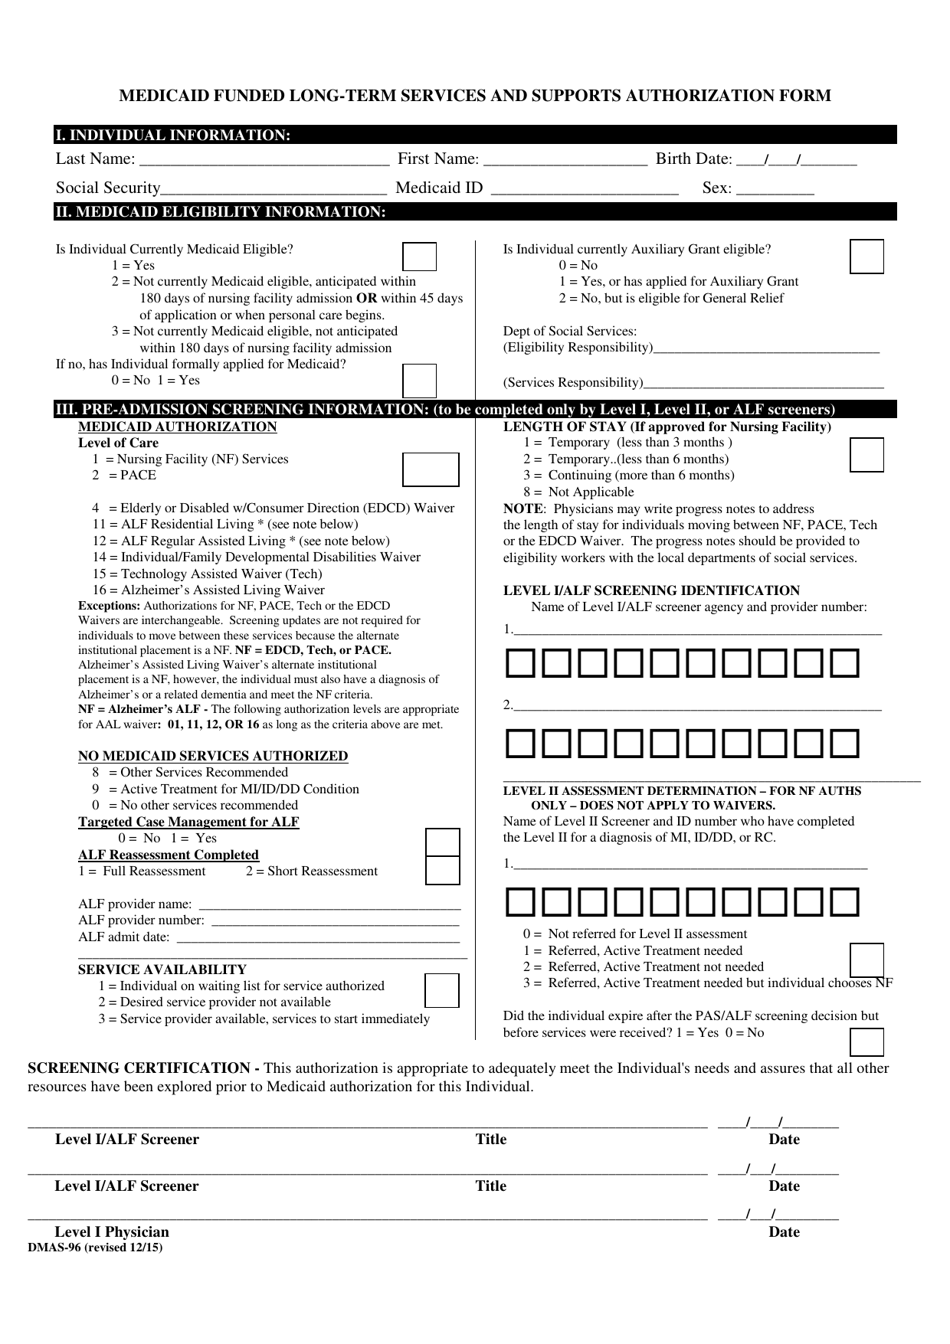 Form DMAS-96 Medicaid Funded Long-Term Services and Supports Authorization Form - Virginia, Page 1